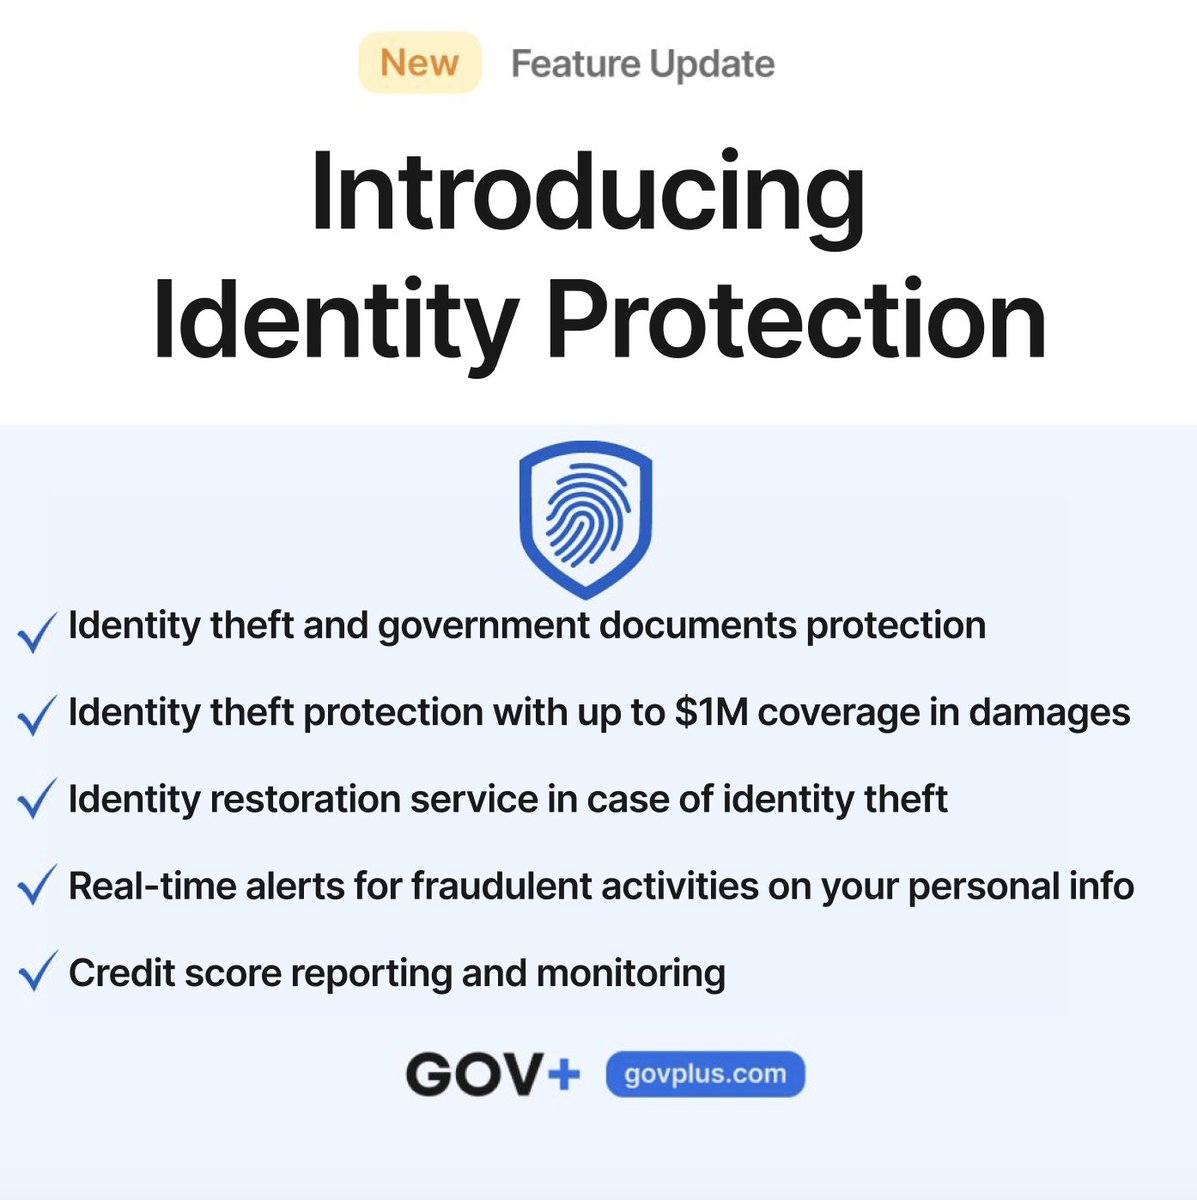 ⏰ Government documents are a prime target for identity thieves 😱 Don't become a victim of identity theft. Tap link to stay vigilant and protect your personal information with GOV+.

bit.ly/3SCpOme #IdentityTheft #IdentityProtection